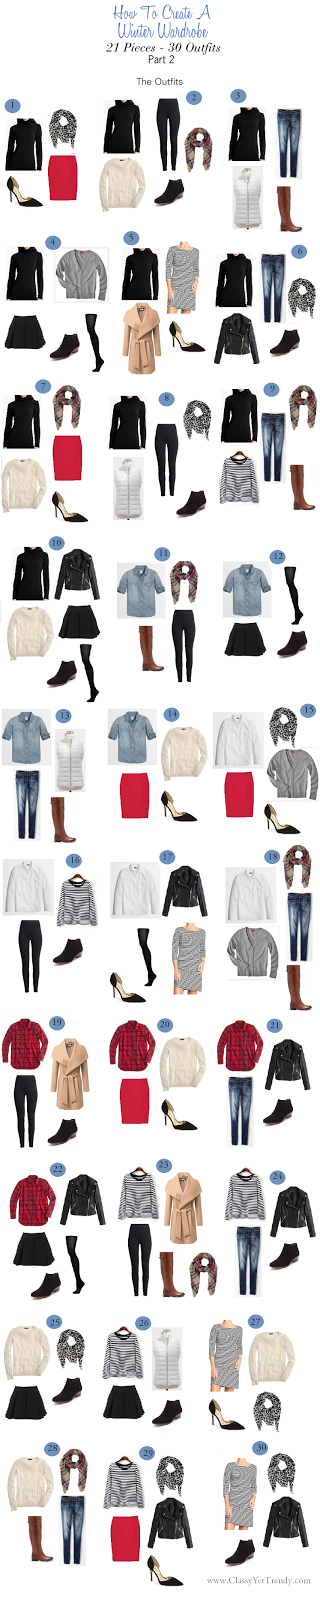 winter wardrobe 30 outfits